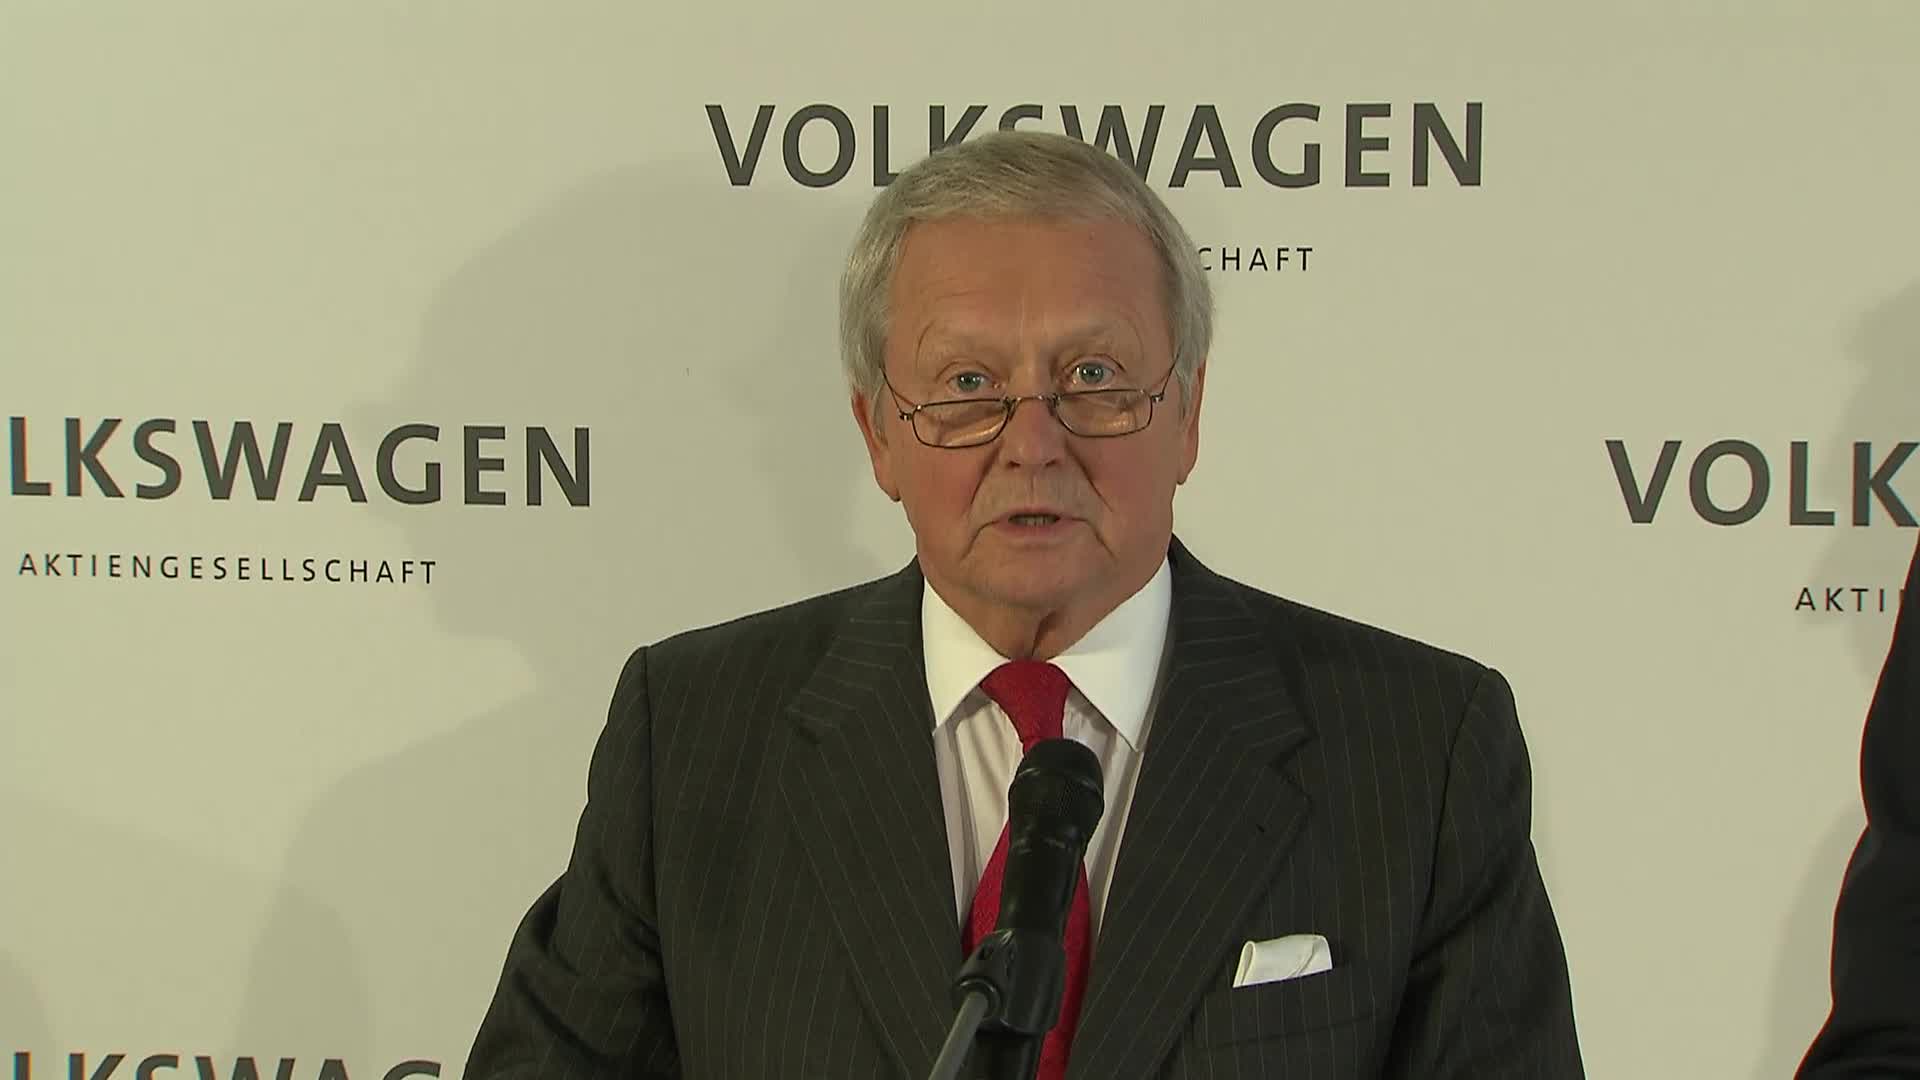 Video statements Supervisory Board of Volkswagen AG